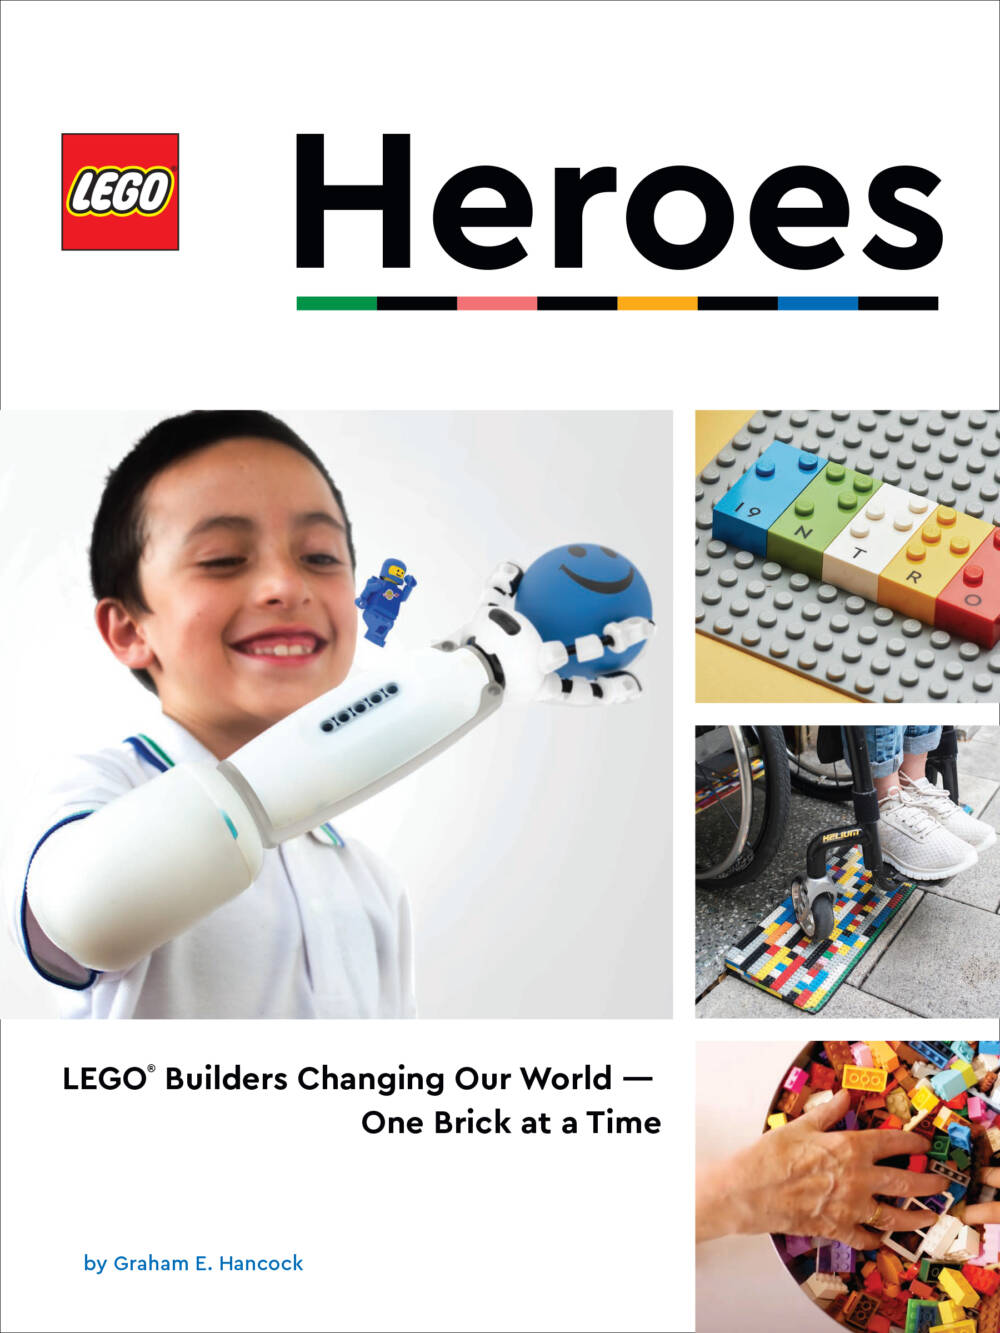 The cover of "LEGO Heroes: LEGO Builders Chaing Our World - One Brick at a Time." (Courtesy)